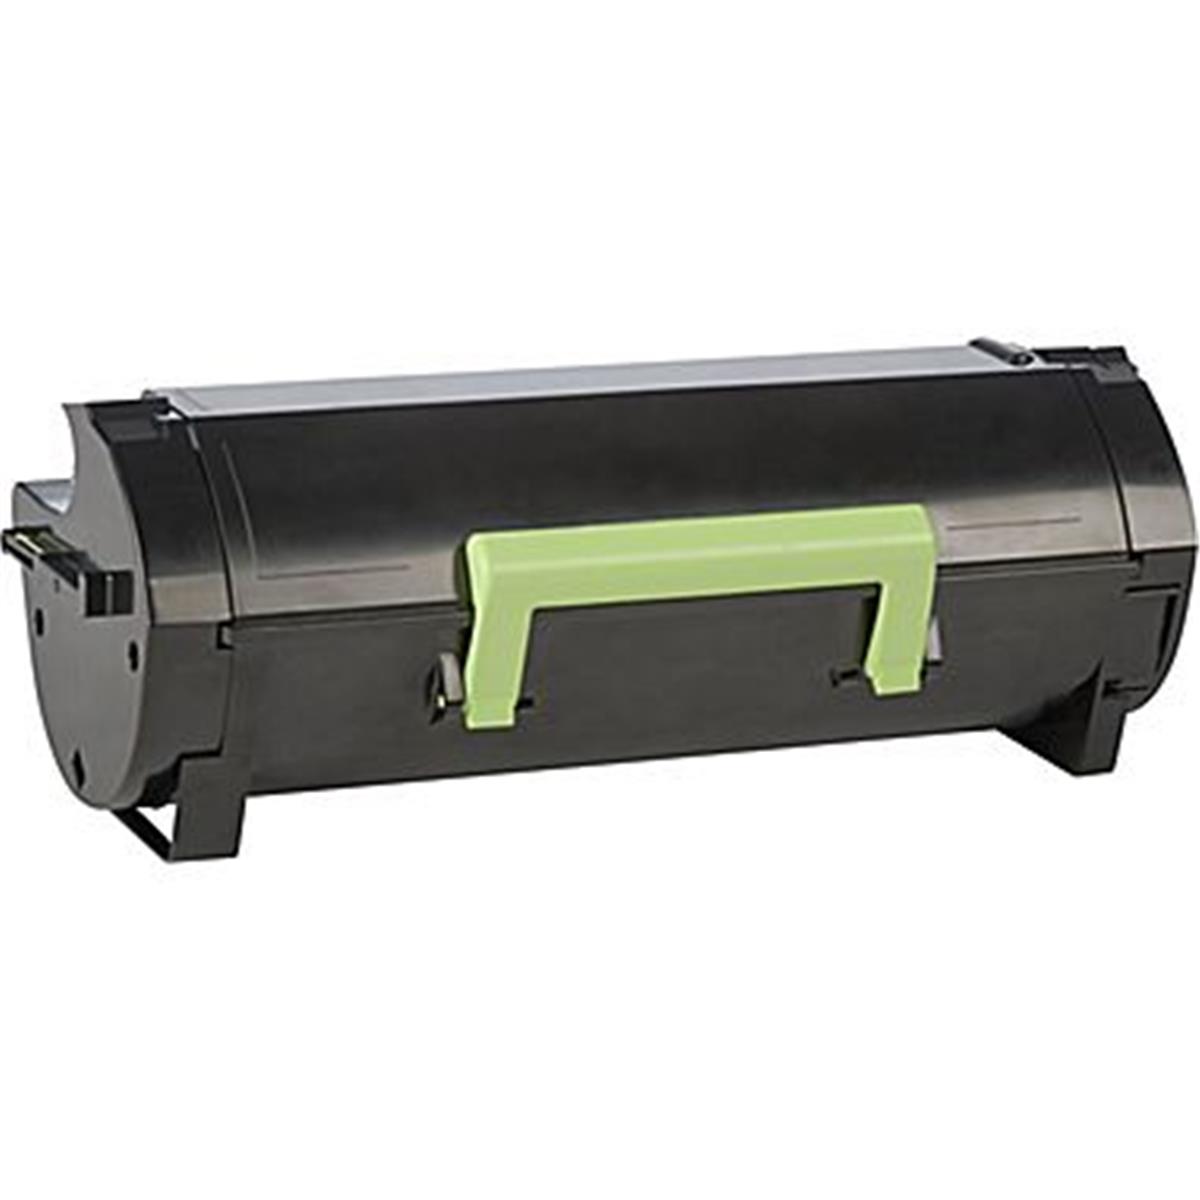 Picture of AB16590090 Lexmark MS310D High Yield Toner Cartridge  Black